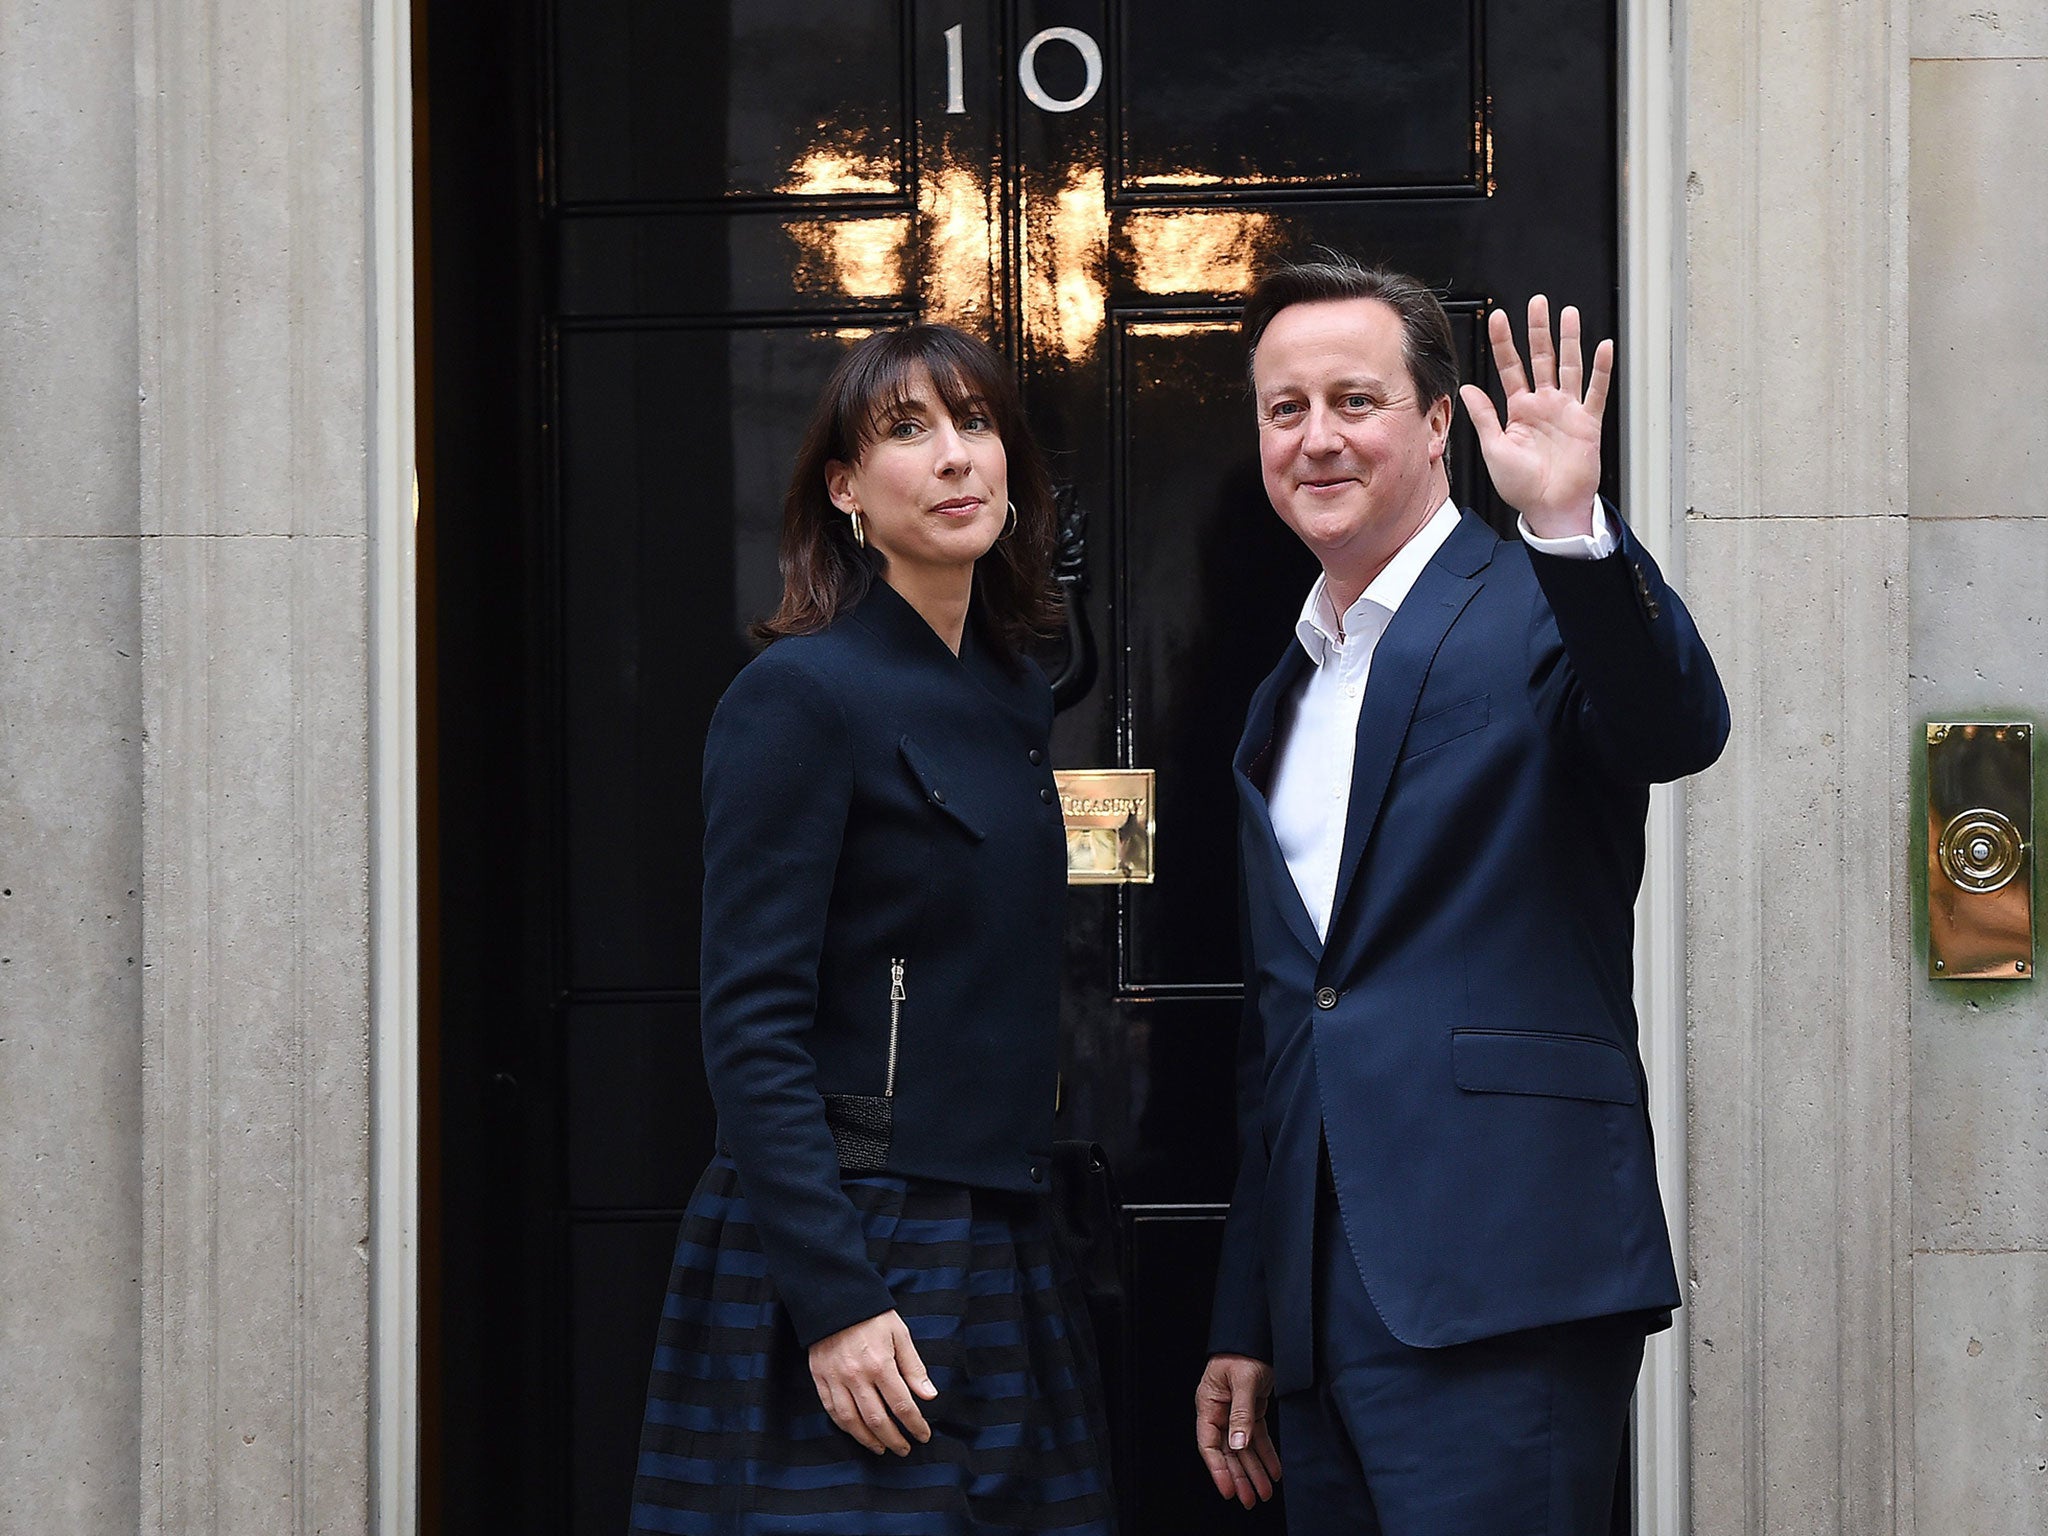 British Prime Minister David Cameron and his wife Samantha arrive to N10 Downing street in London